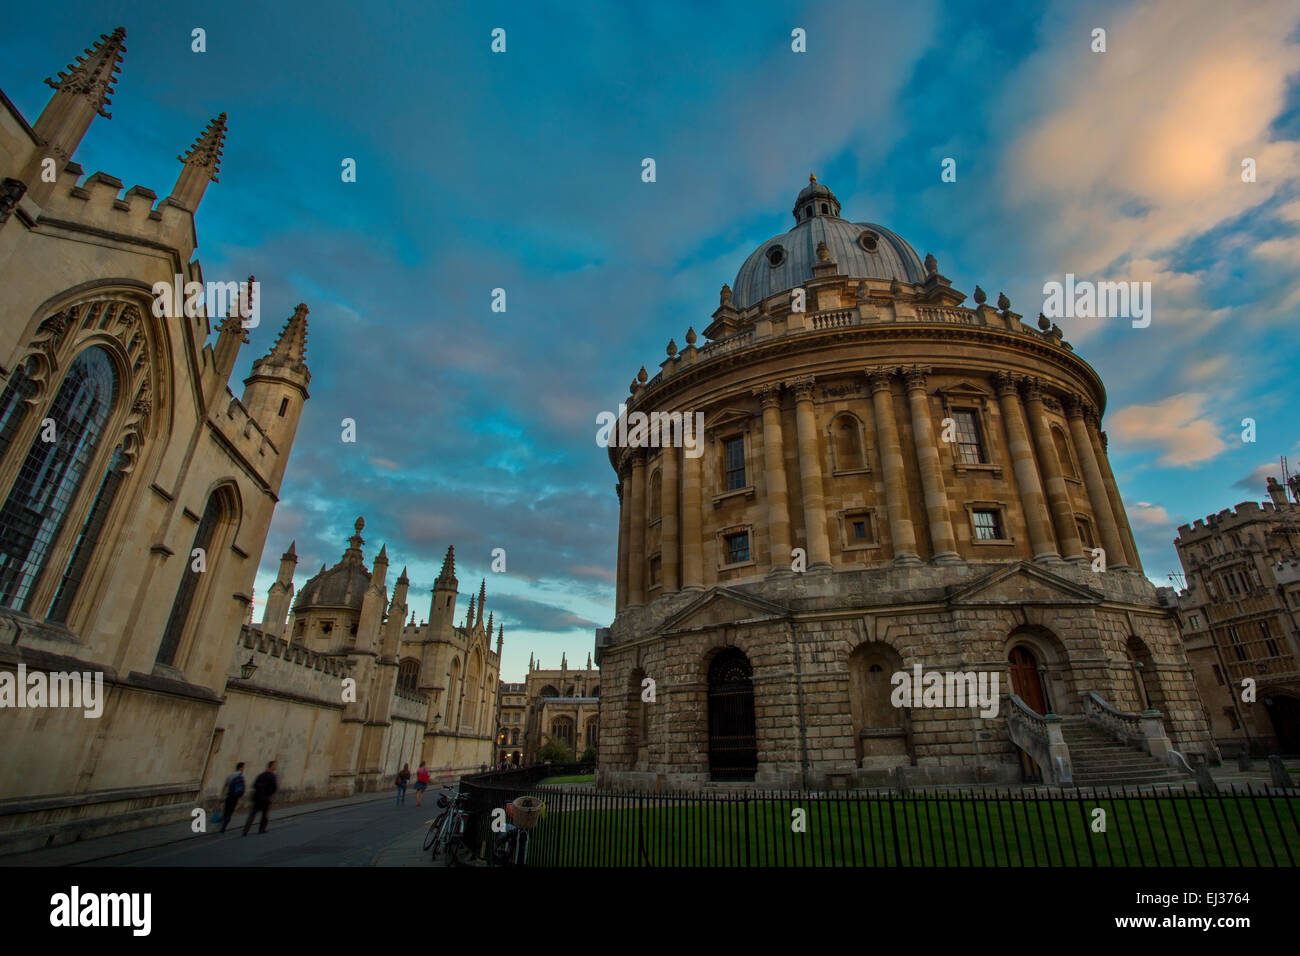 Setting sunlight on Radcliffe Camera and the buildings of Oxford, Oxfordshire, England Stock Photo